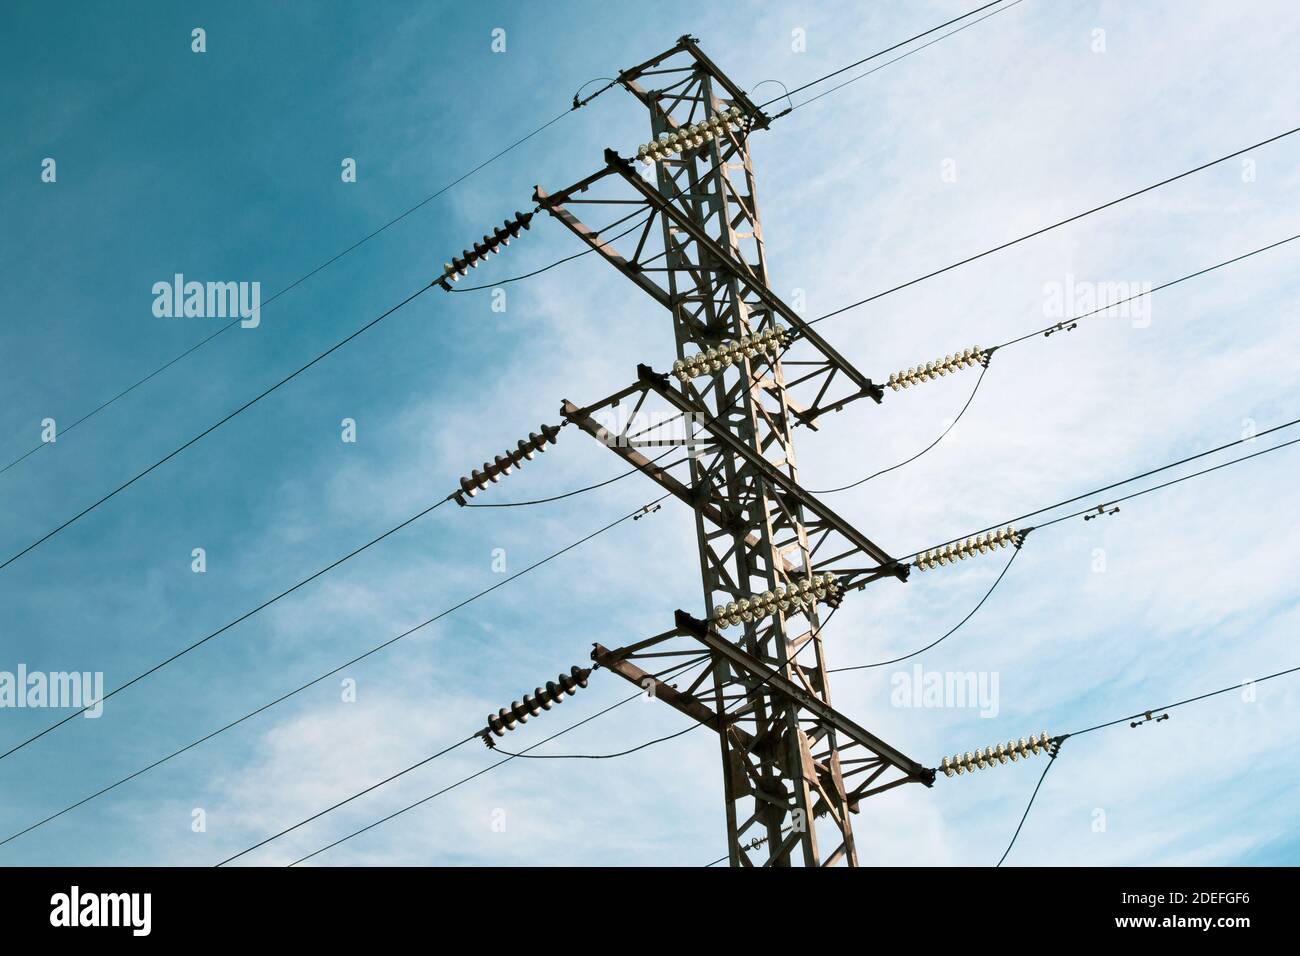 Energy distribution high voltage power line tower with wires and trees Stock Photo